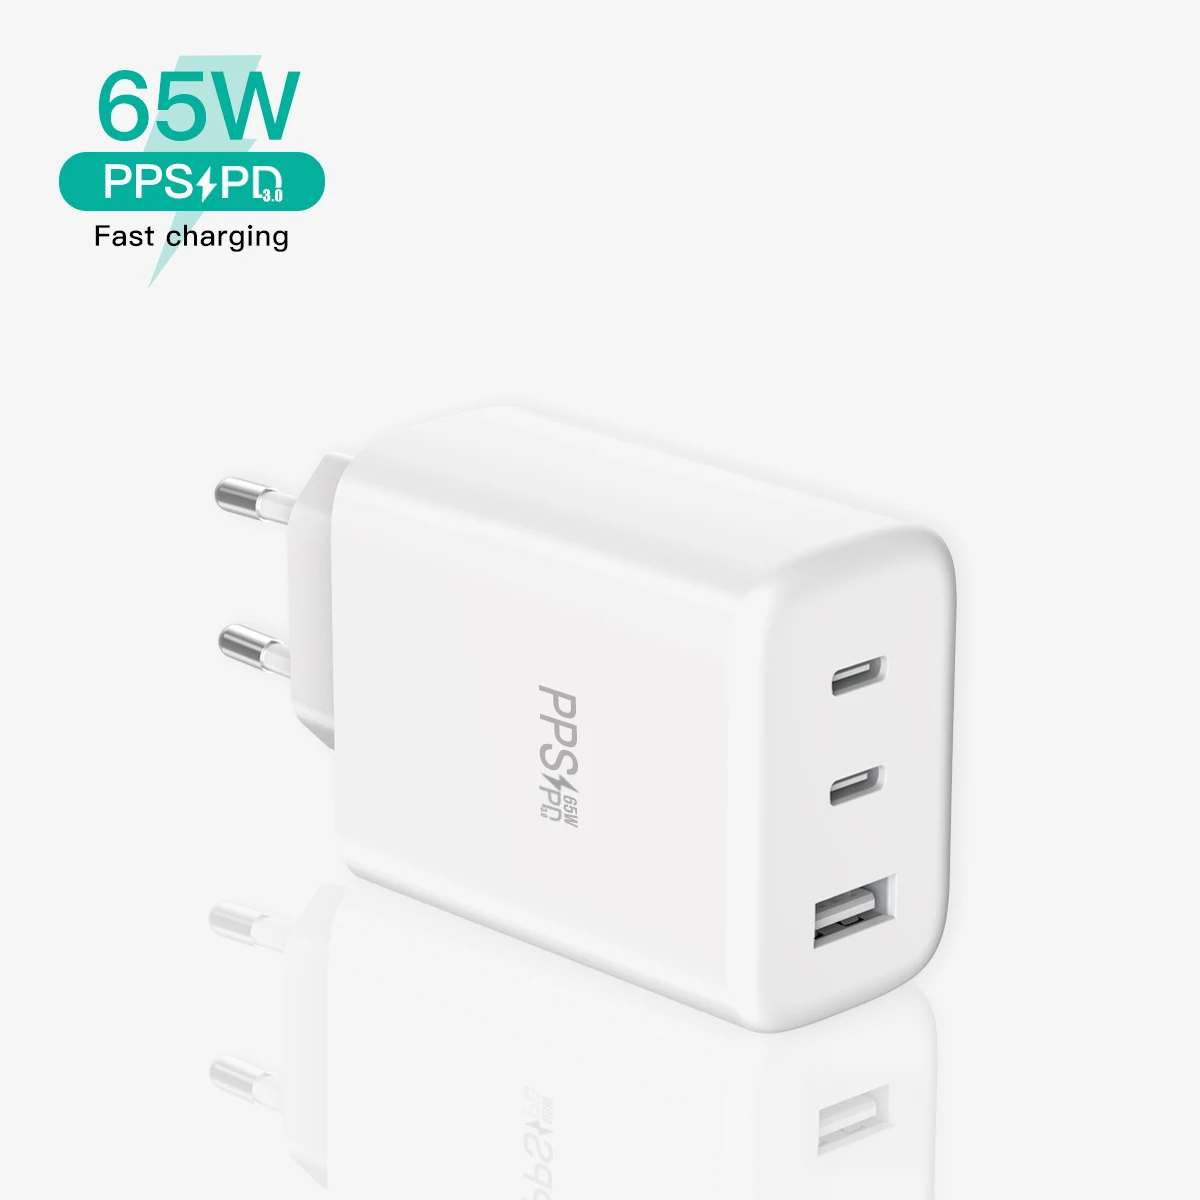 

Factory OEM 65W Ce Rohs Fcc Cb Eu Us Uk USB-C PD Adapter Usb C Wall Charger For Iphone 12 13, White black